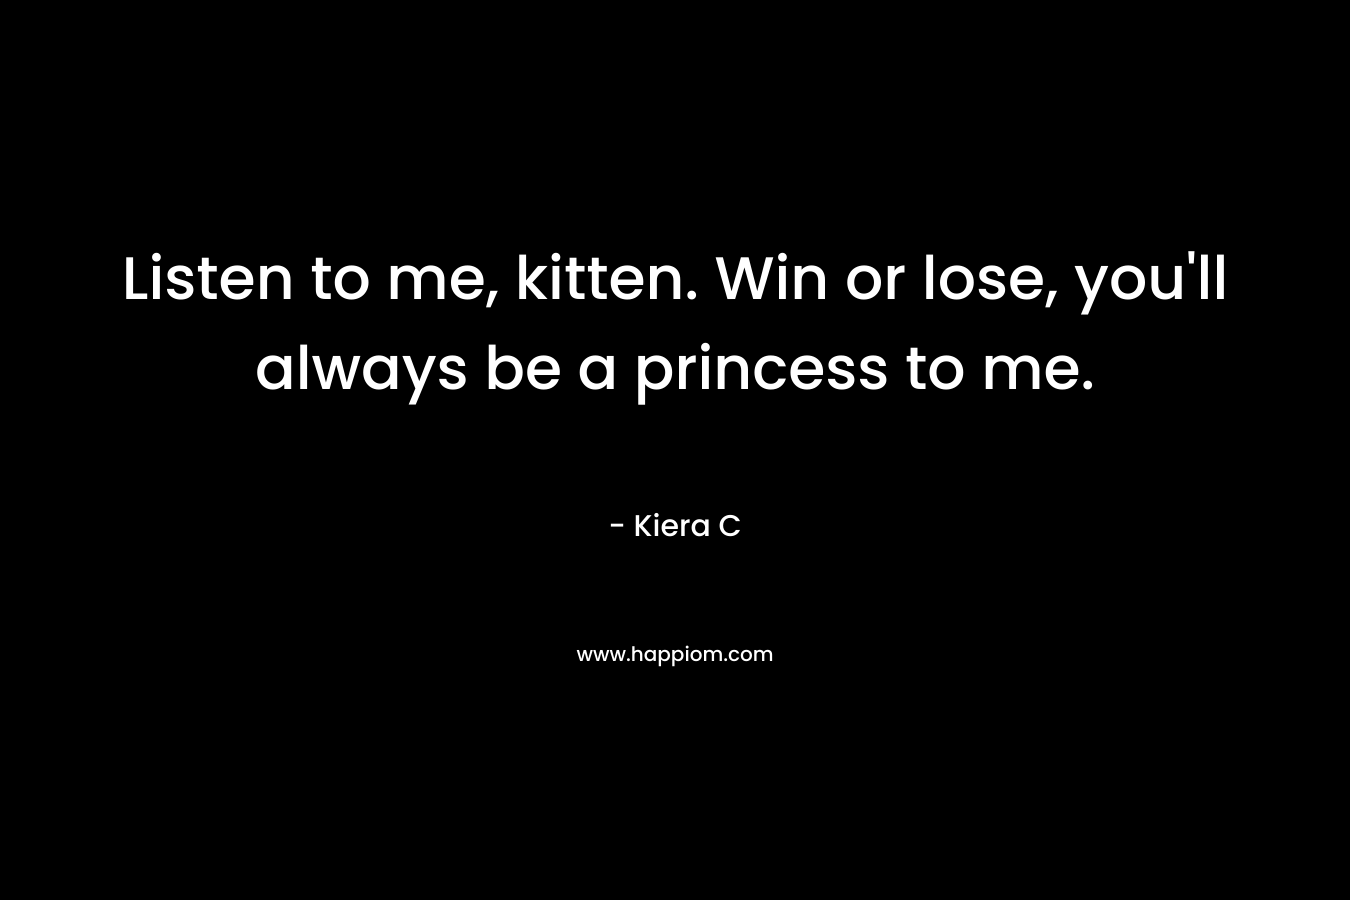 Listen to me, kitten. Win or lose, you’ll always be a princess to me. – Kiera C